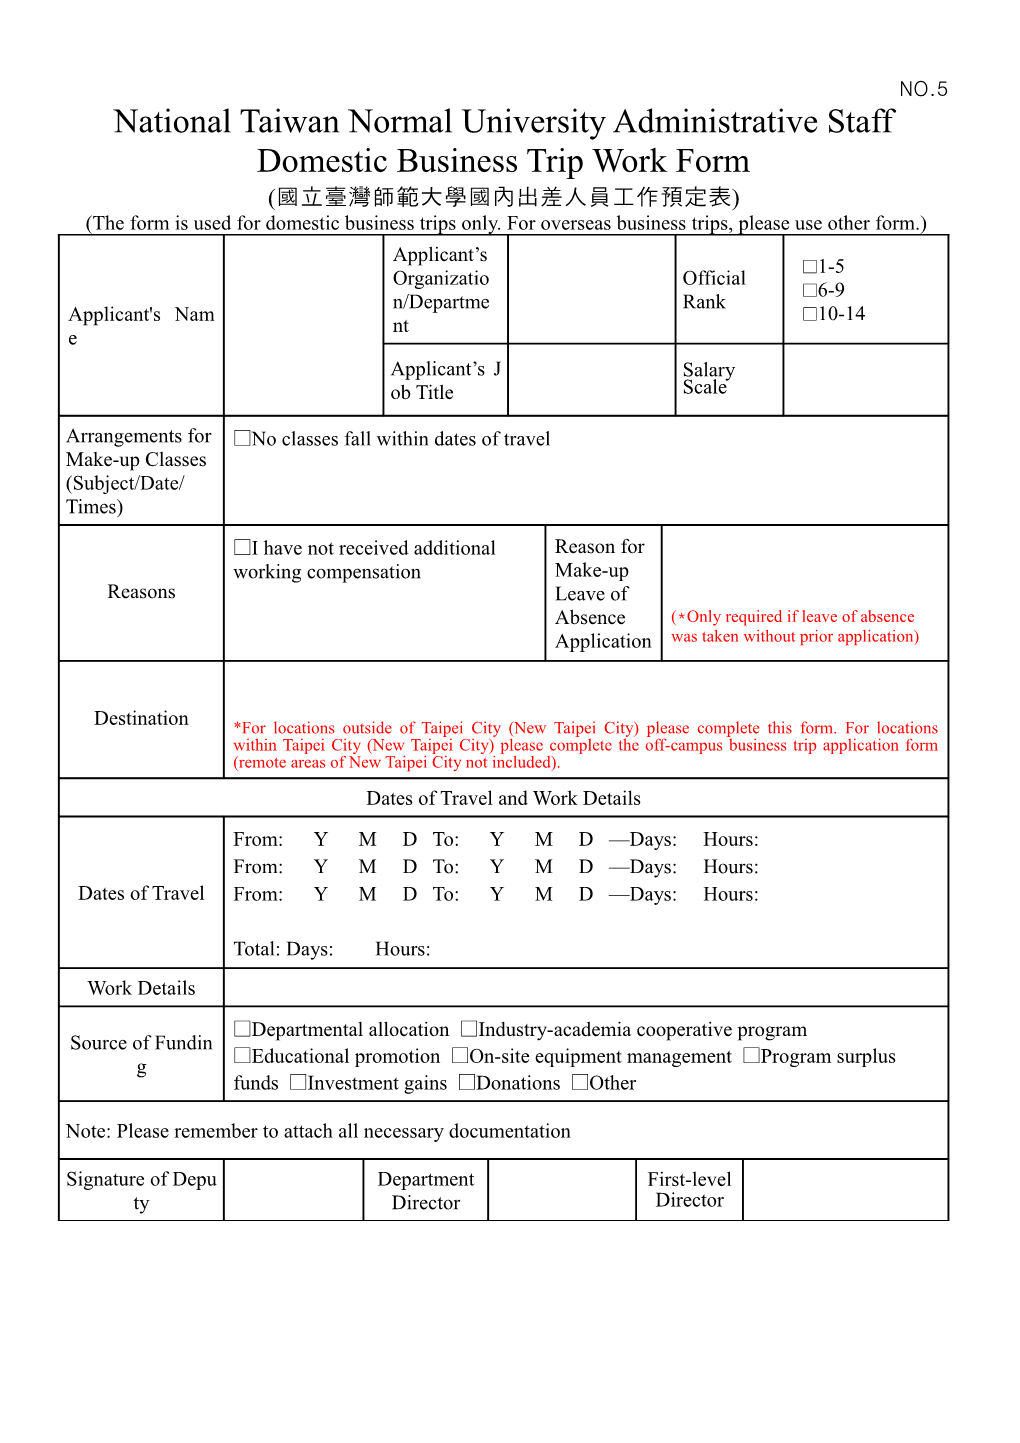 National Taiwan Normal University Administrative Staff Domestic Business Trip Work Form